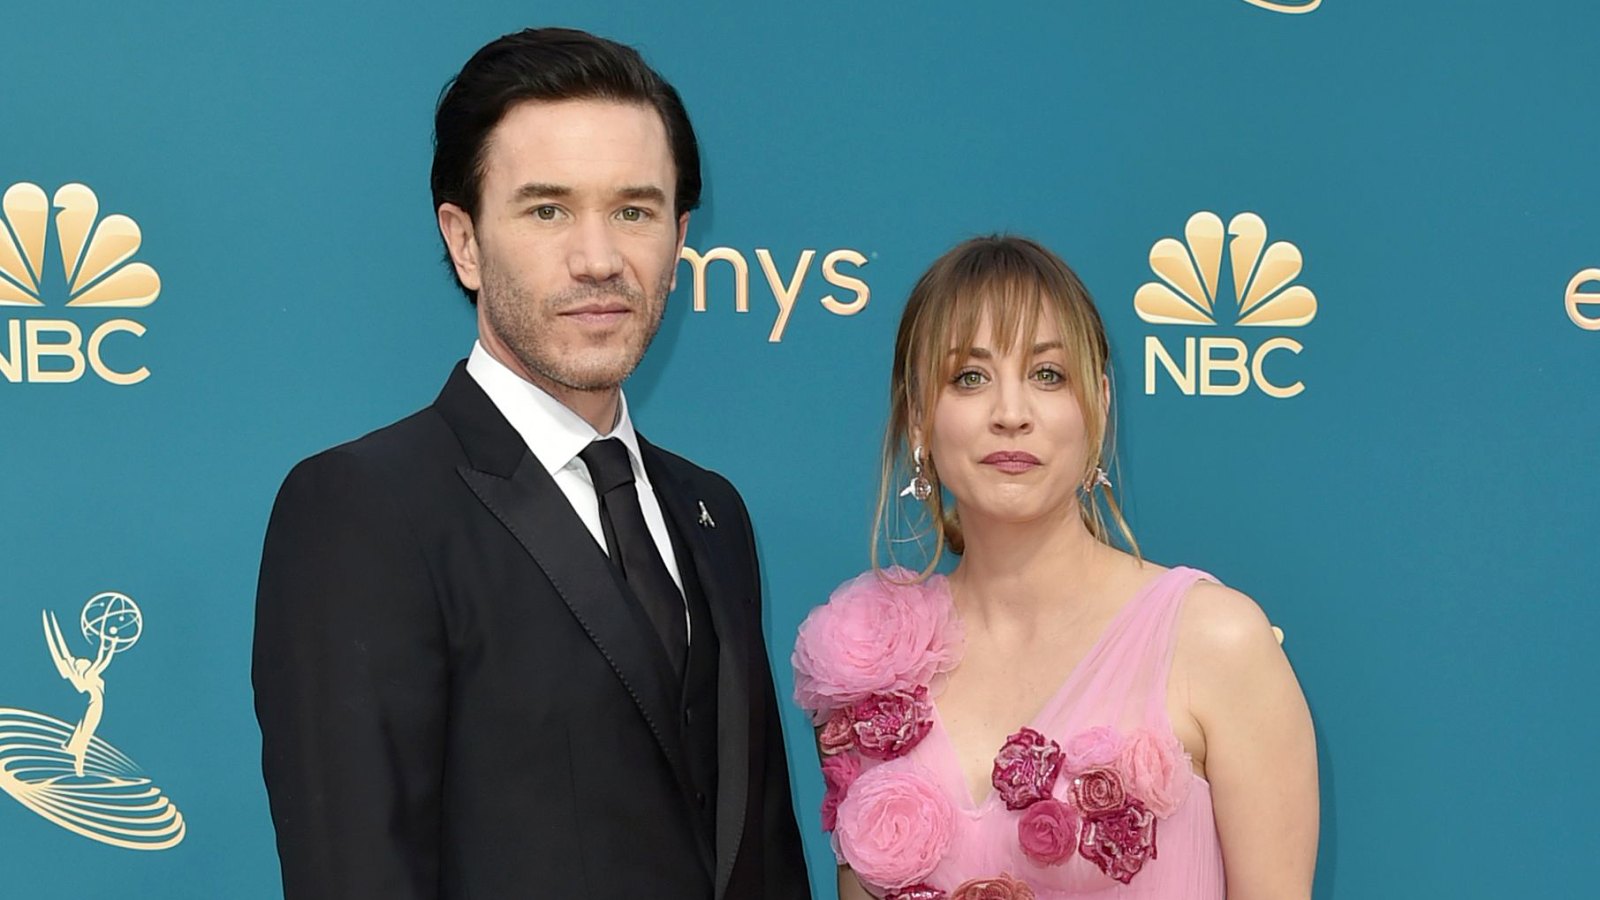 Kaley Cuoco and Tom Pelphrey Make Their Red Carpet Debut at the 2022 Emmys